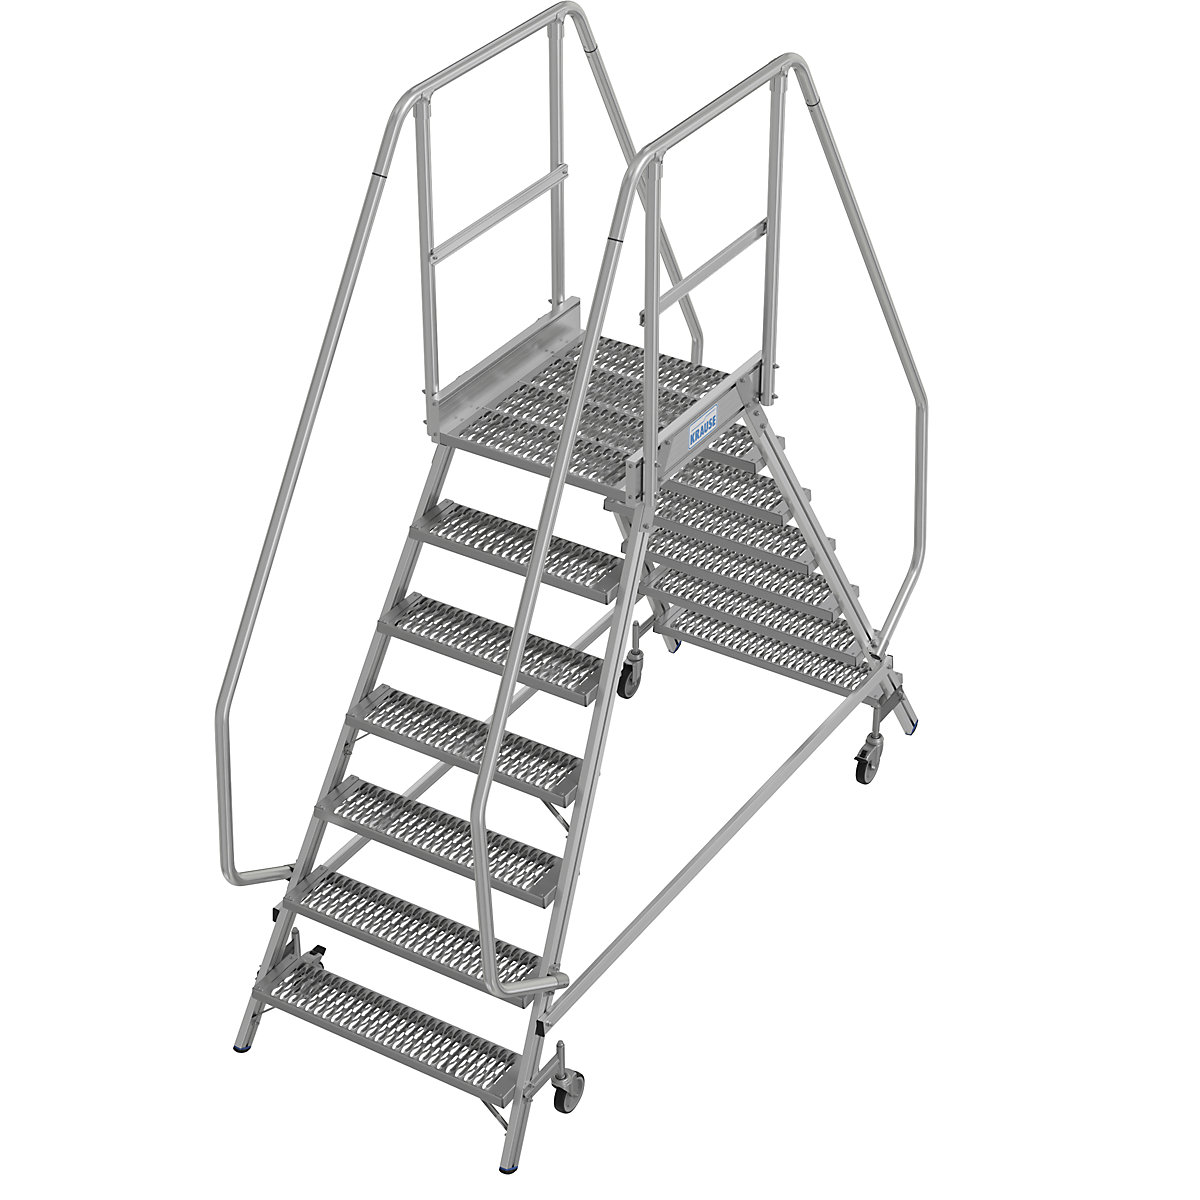 Mobile safety steps with R13 anti-slip properties – KRAUSE, with double sided access, 2x7 steps incl. platform-3